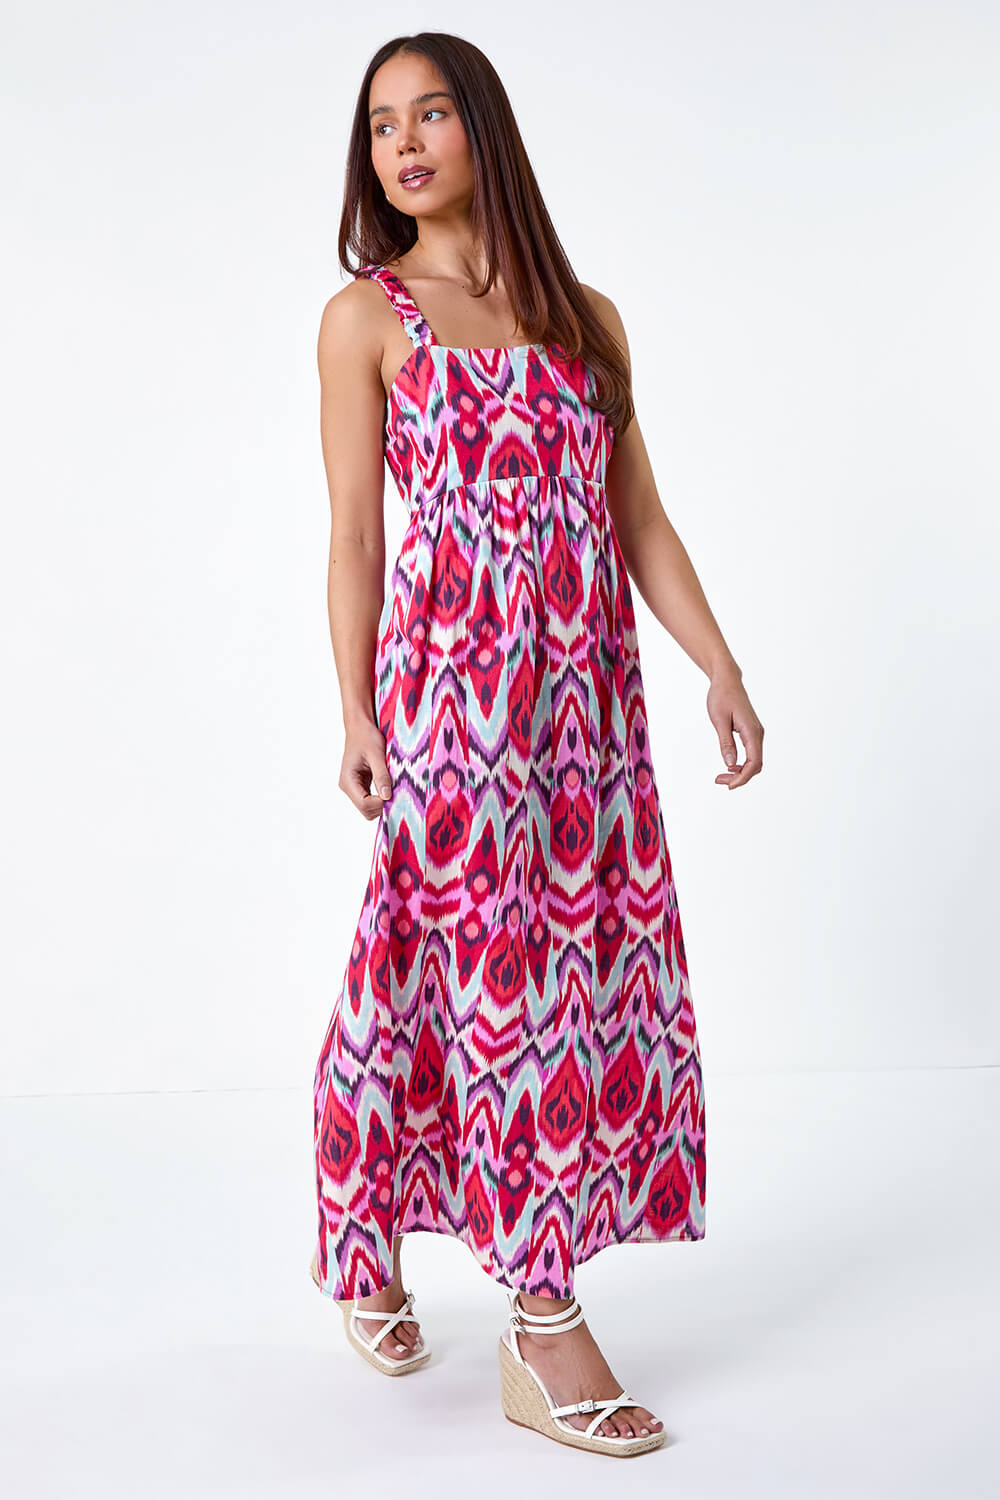 CORAL Petite Aztec Stretch Back Maxi Dress, Image 2 of 5